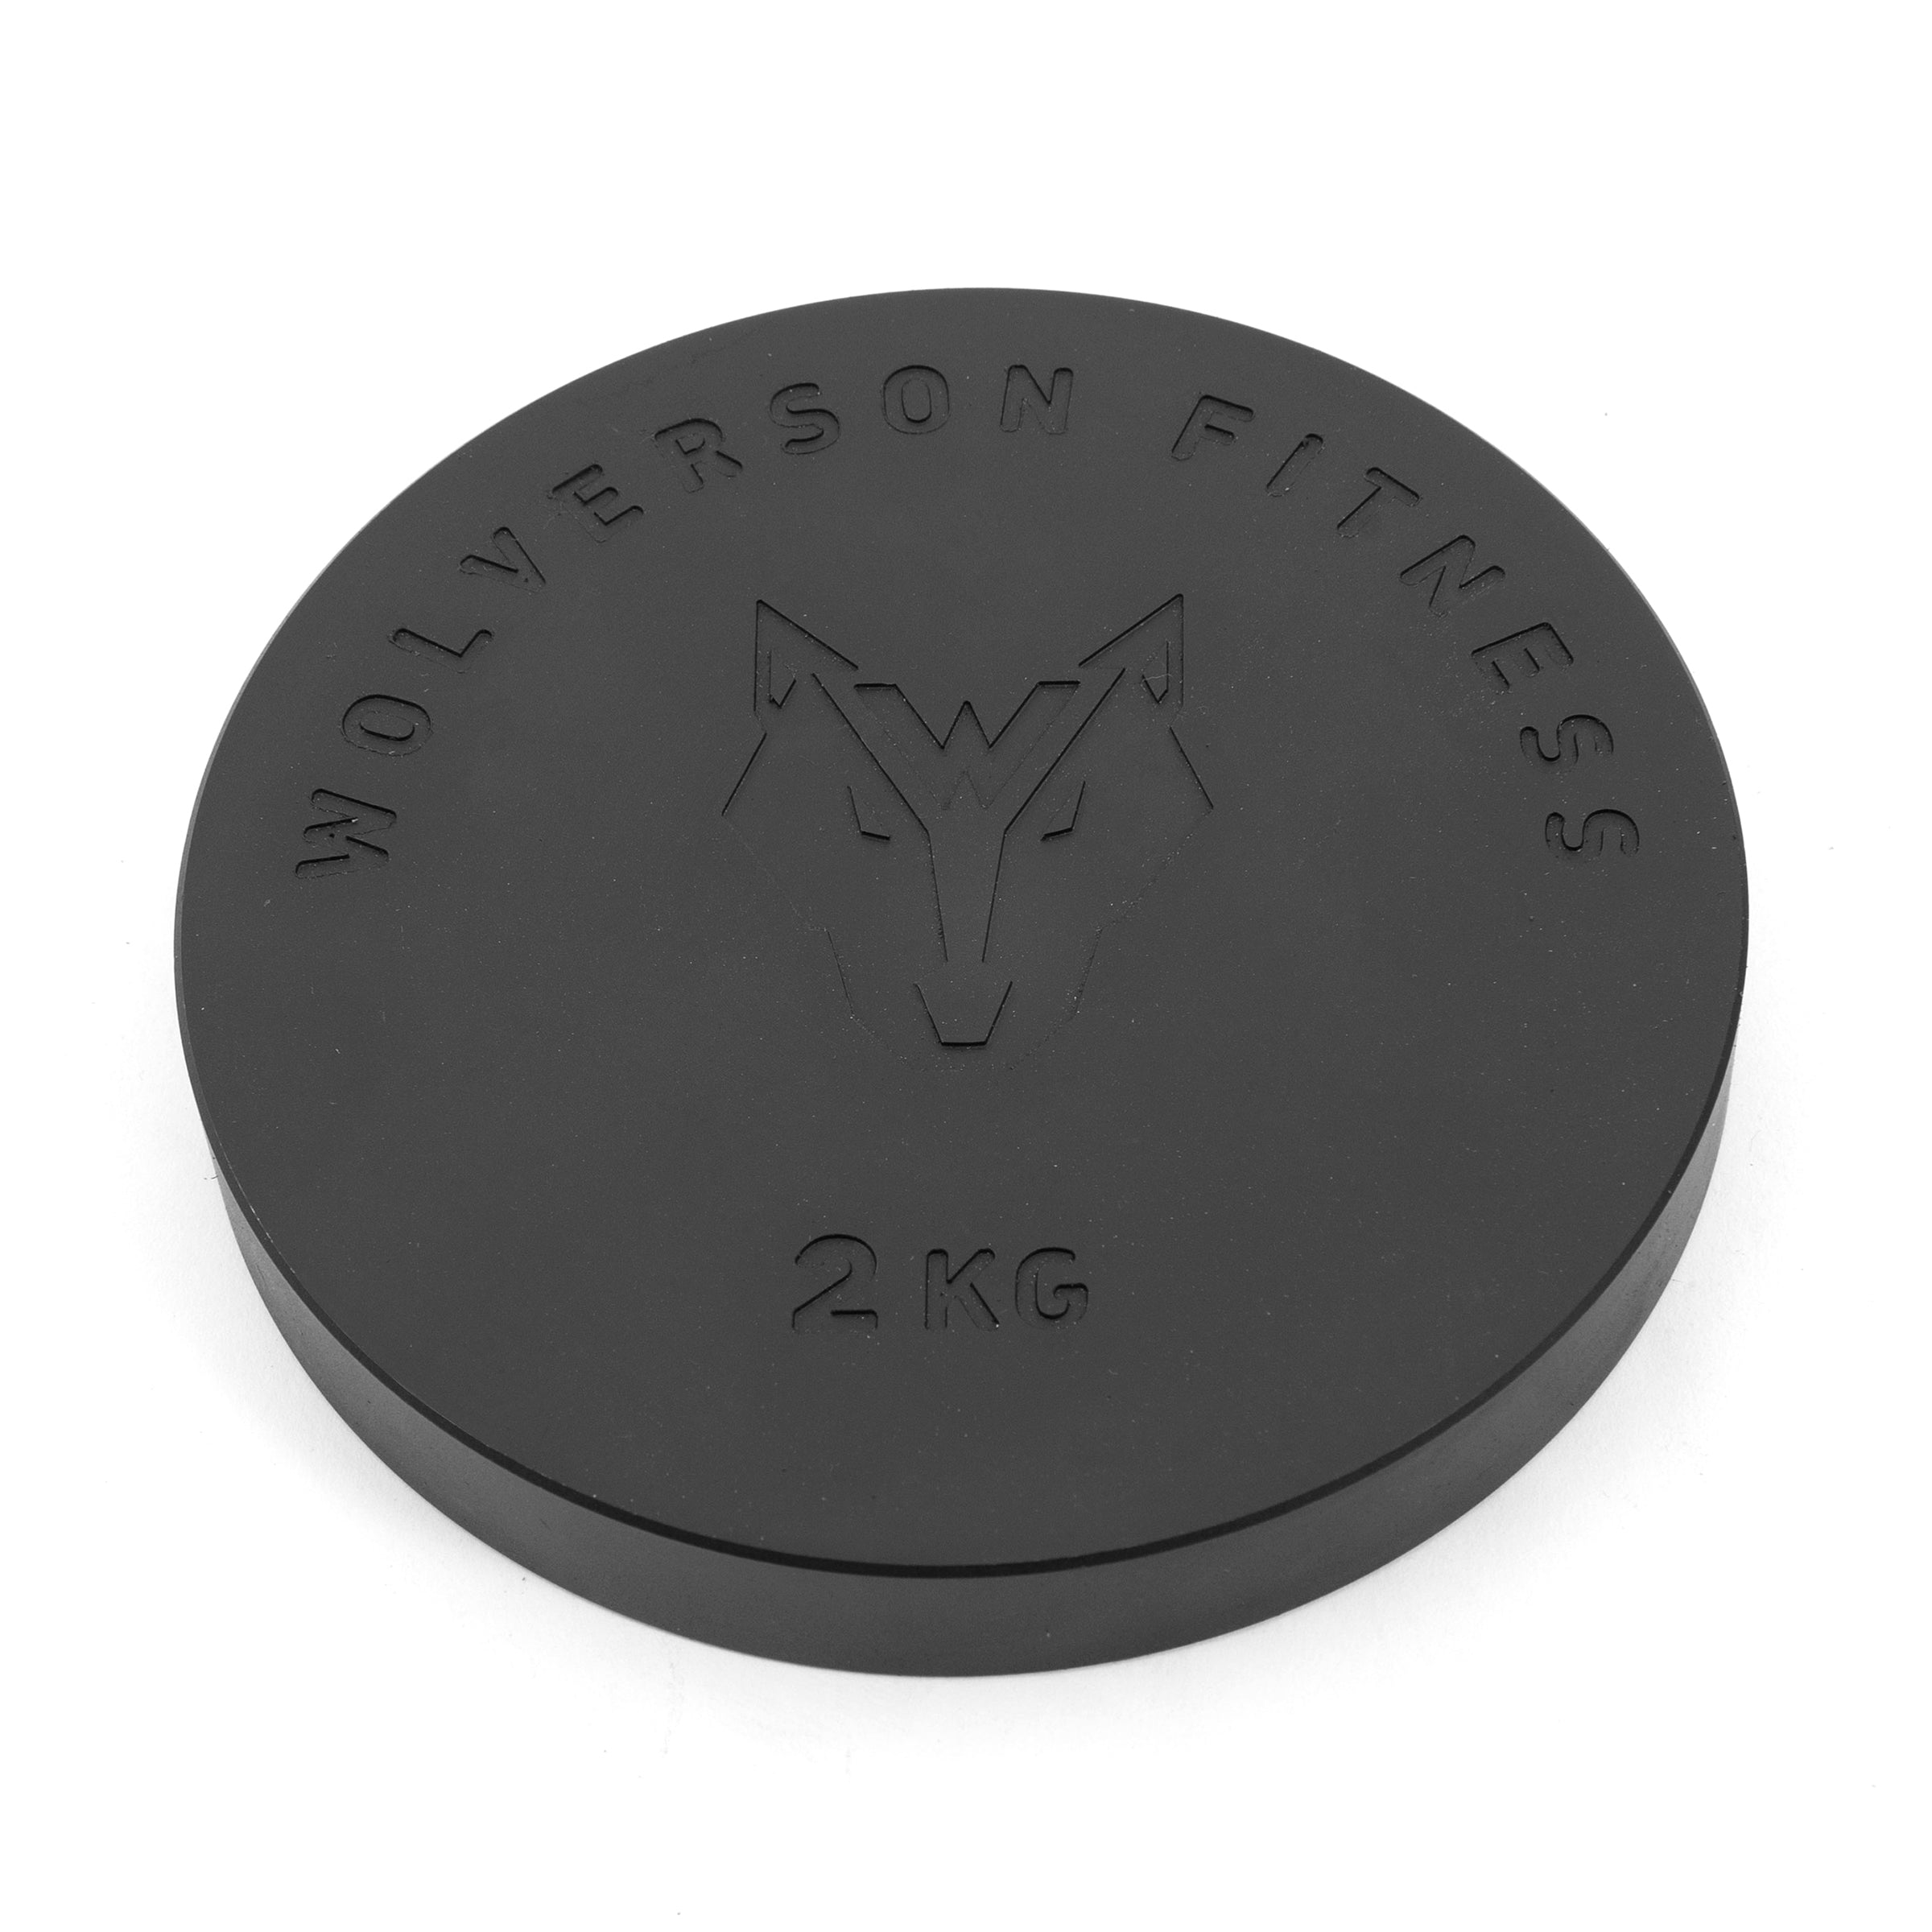 Wolverson Kettlebell Weight Plates - Wolverson Fitness